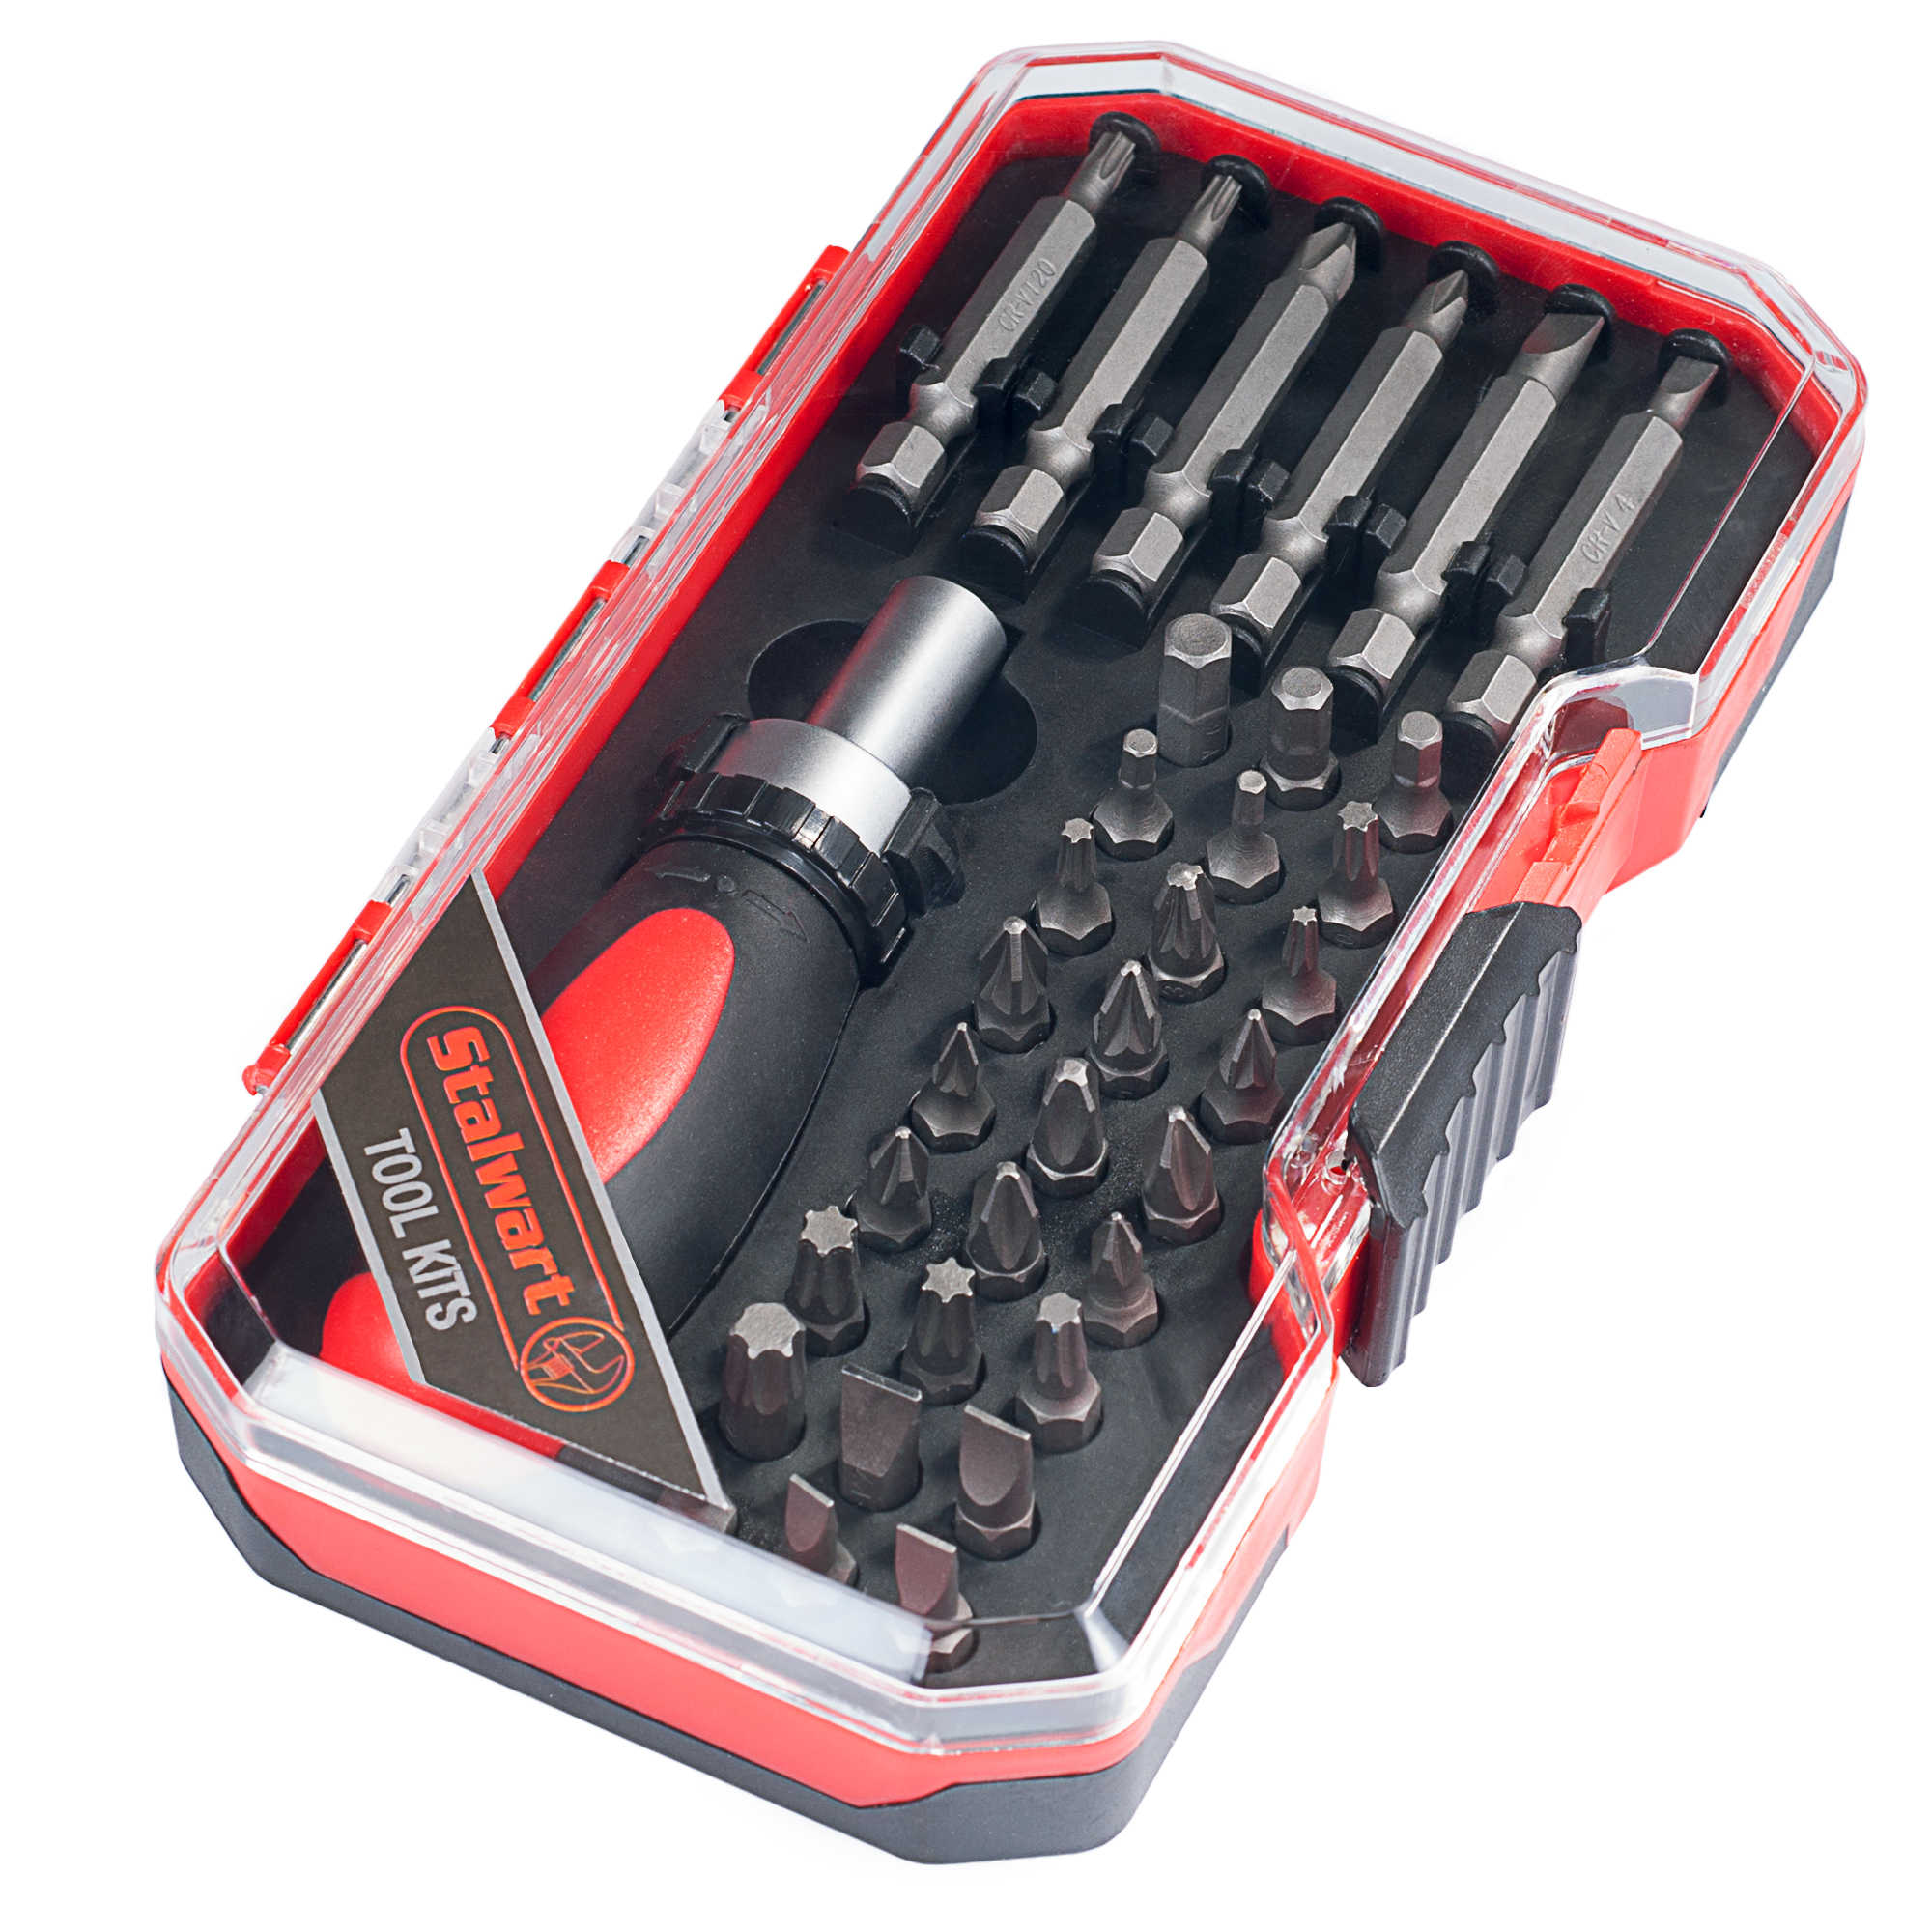 Stubby Ratchet and Screwdriver Bit Set 34 PC by Stalwart